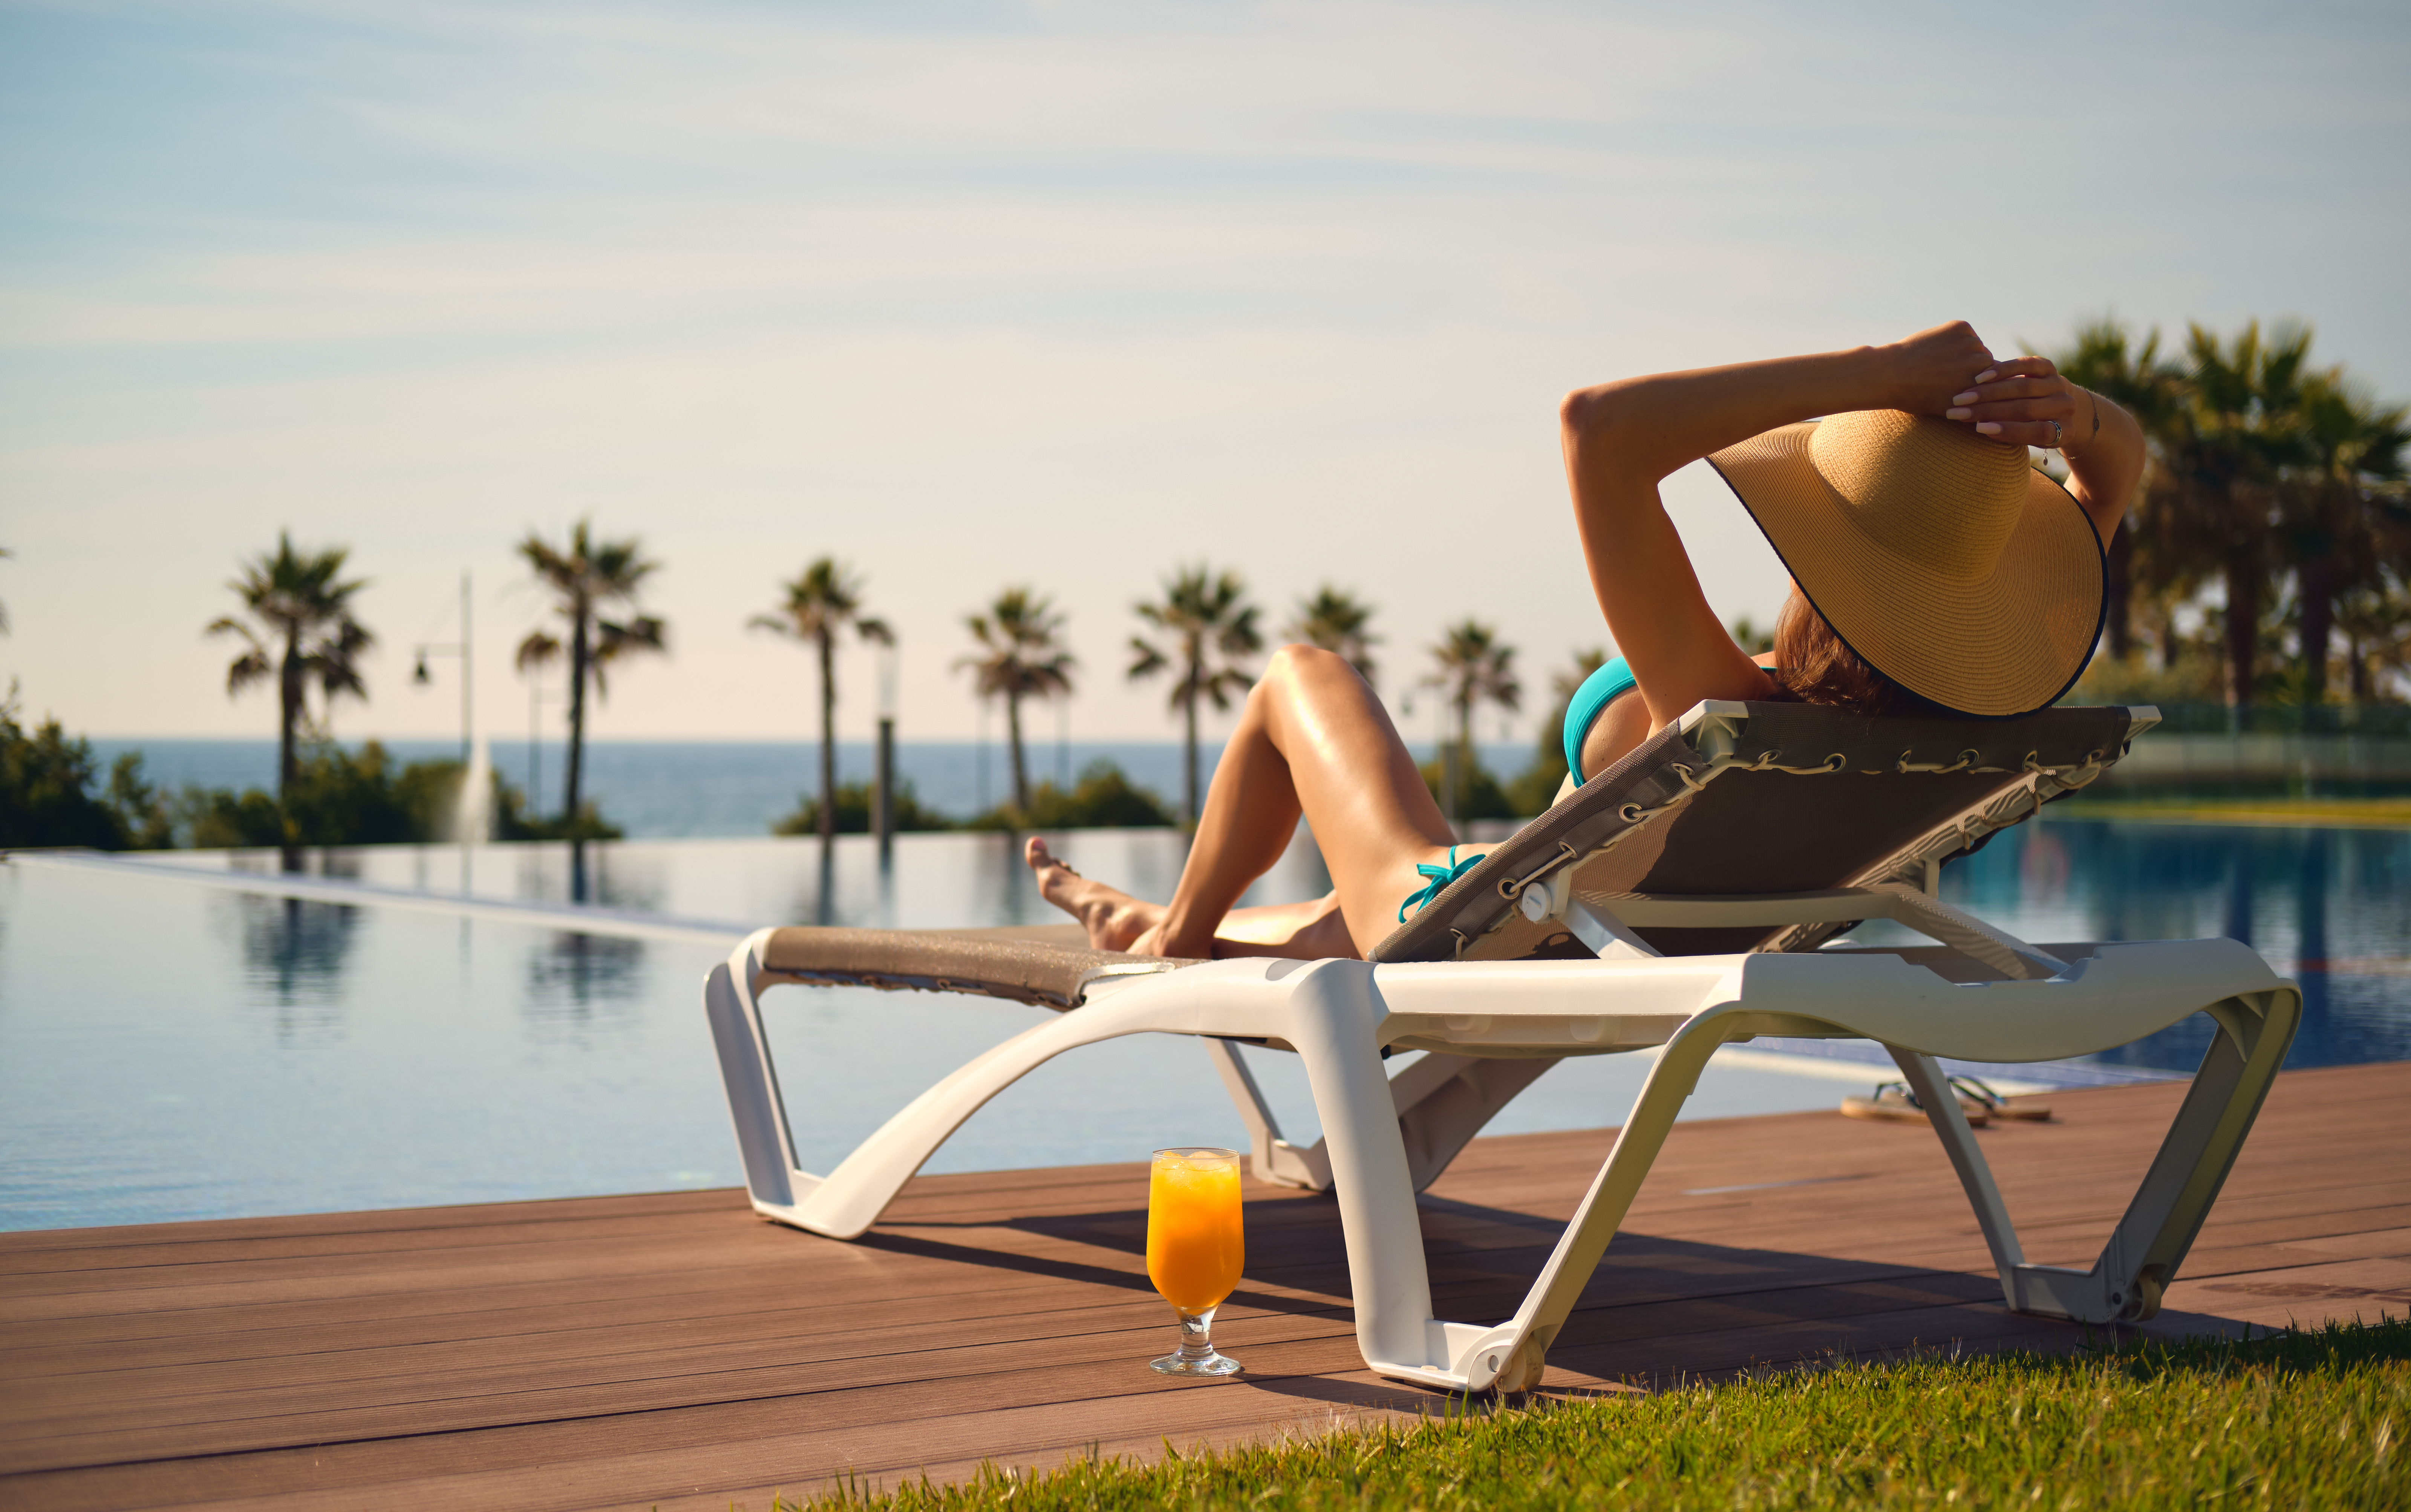 You can bag extra breaks this year by maximising your holiday allowance